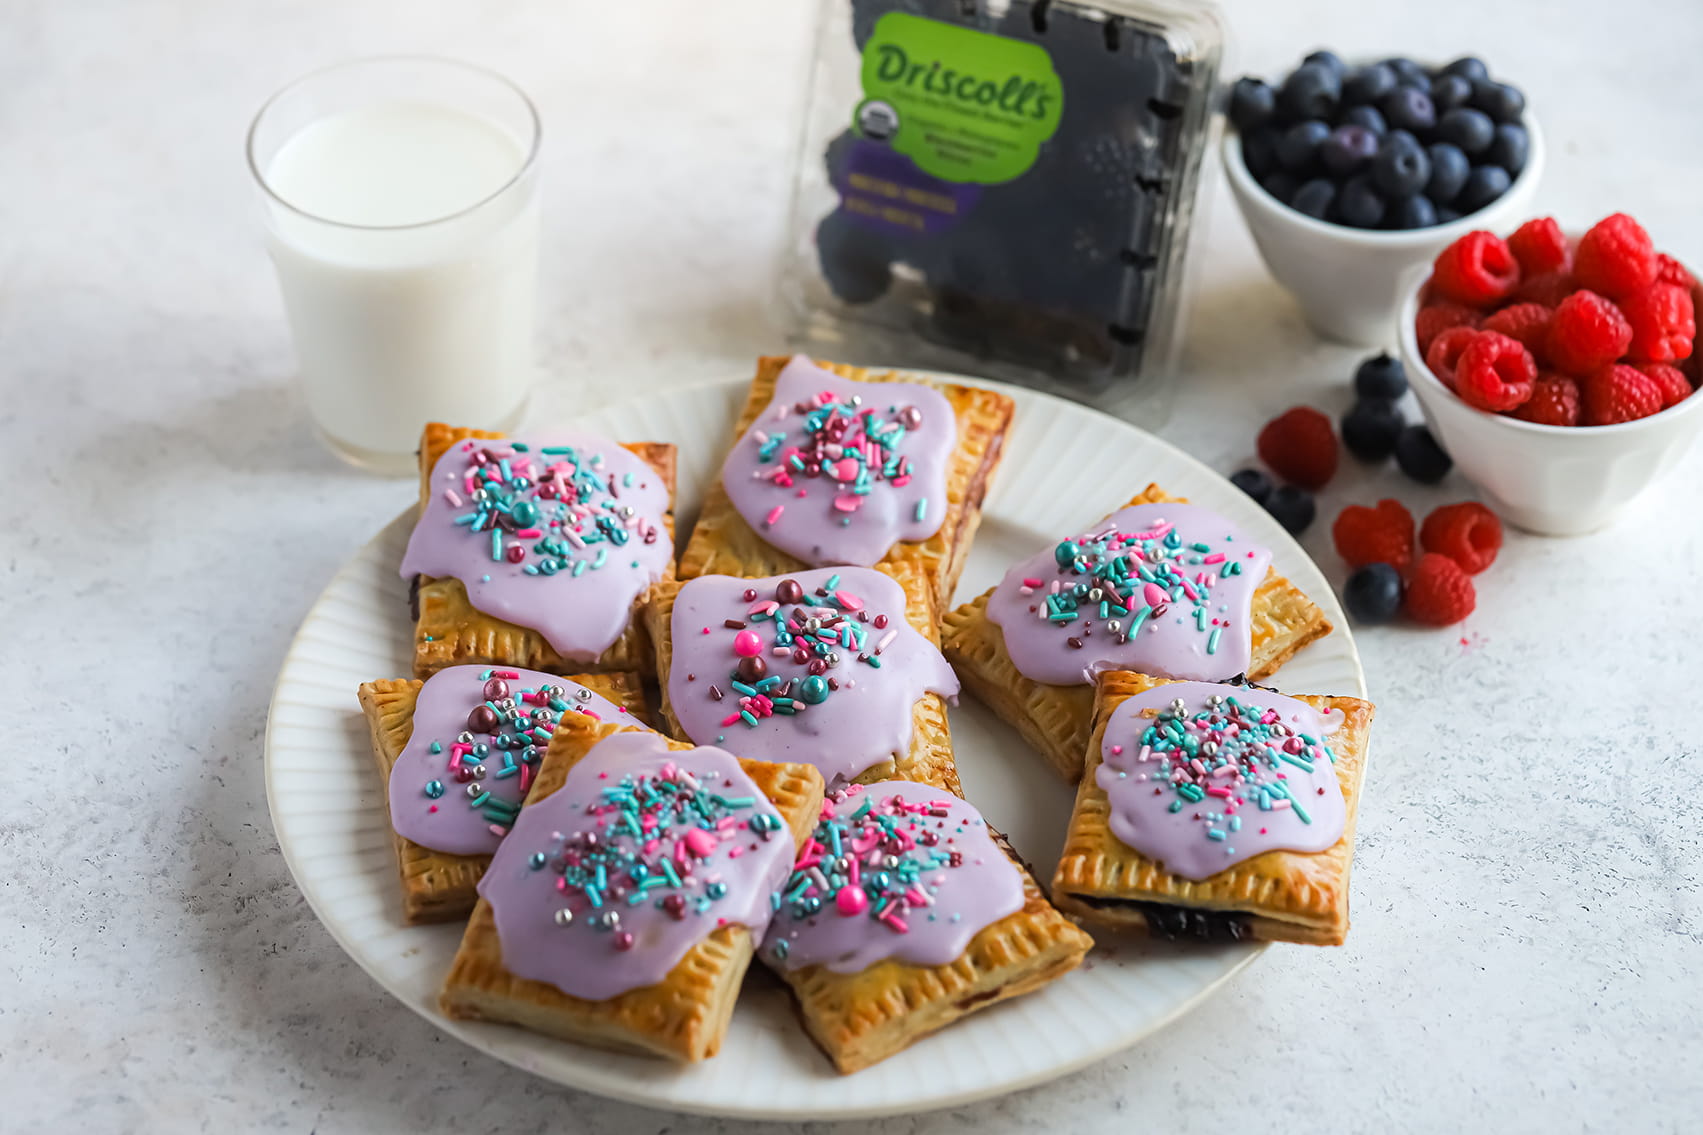 Wild Berry Pop Tarts with Mixed Berry Filling Recipe